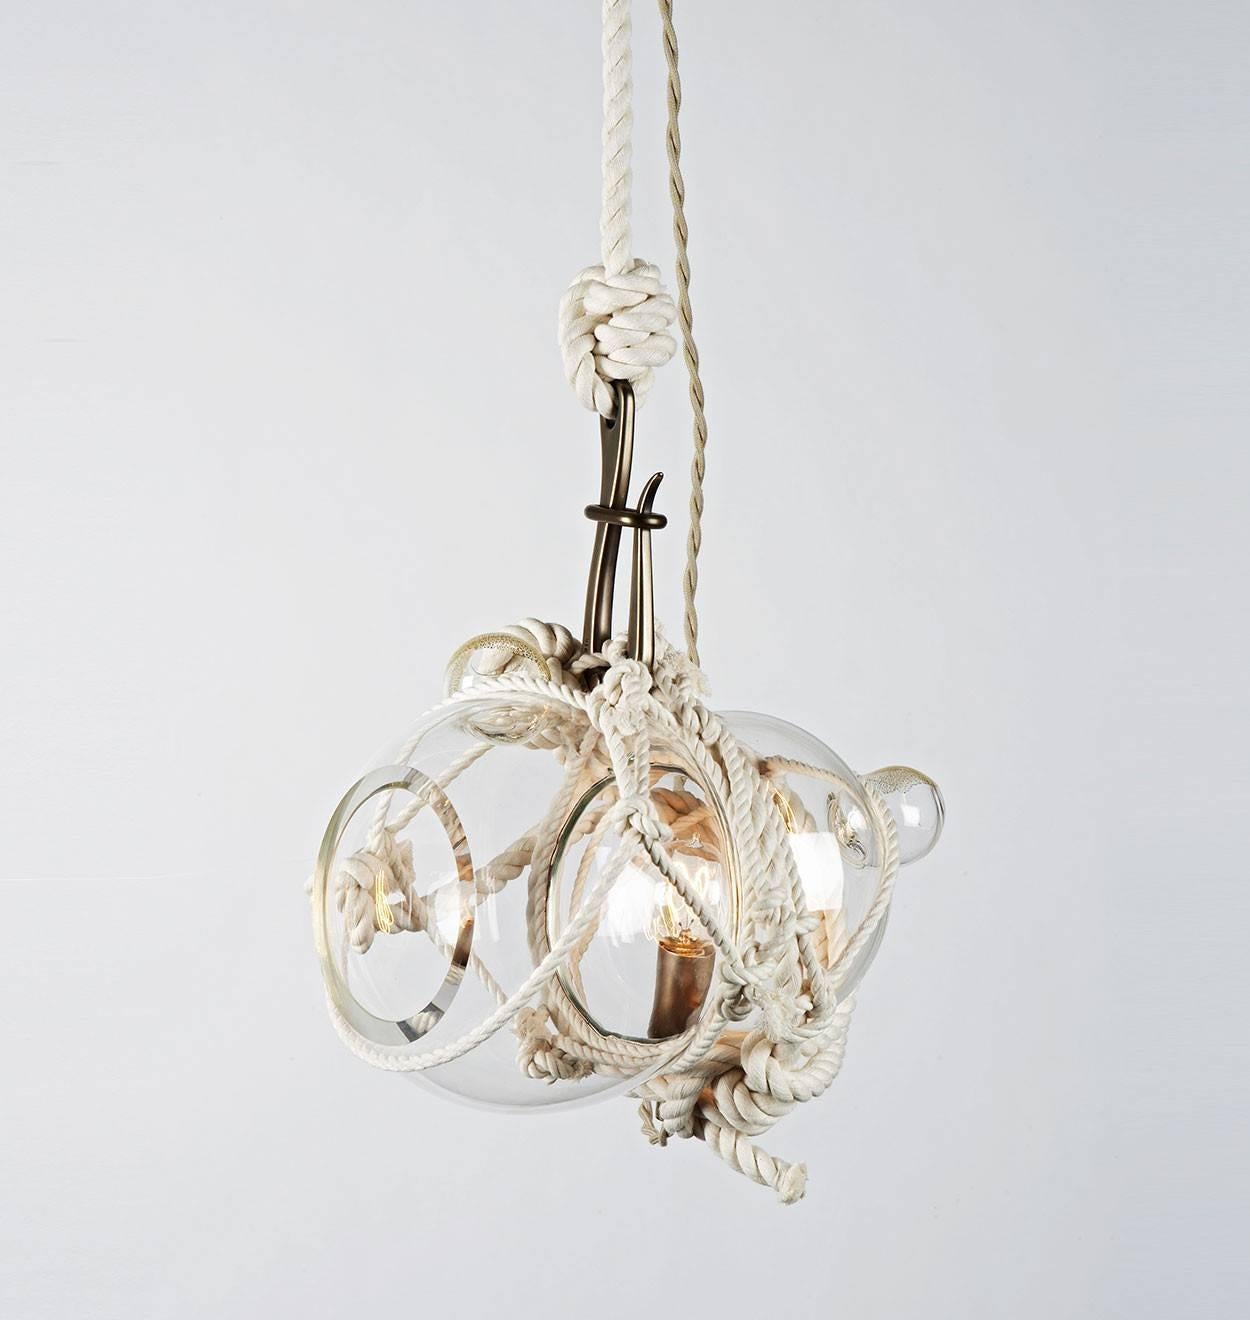 Heavily inspired by Japanese packaging and maritime culture, knotty bubbles is a sculptural light made of hand-blown glass globes tied together with knotted rope. The handmade nature of the knotty bubbles ensures that each is a unique piece.

Please